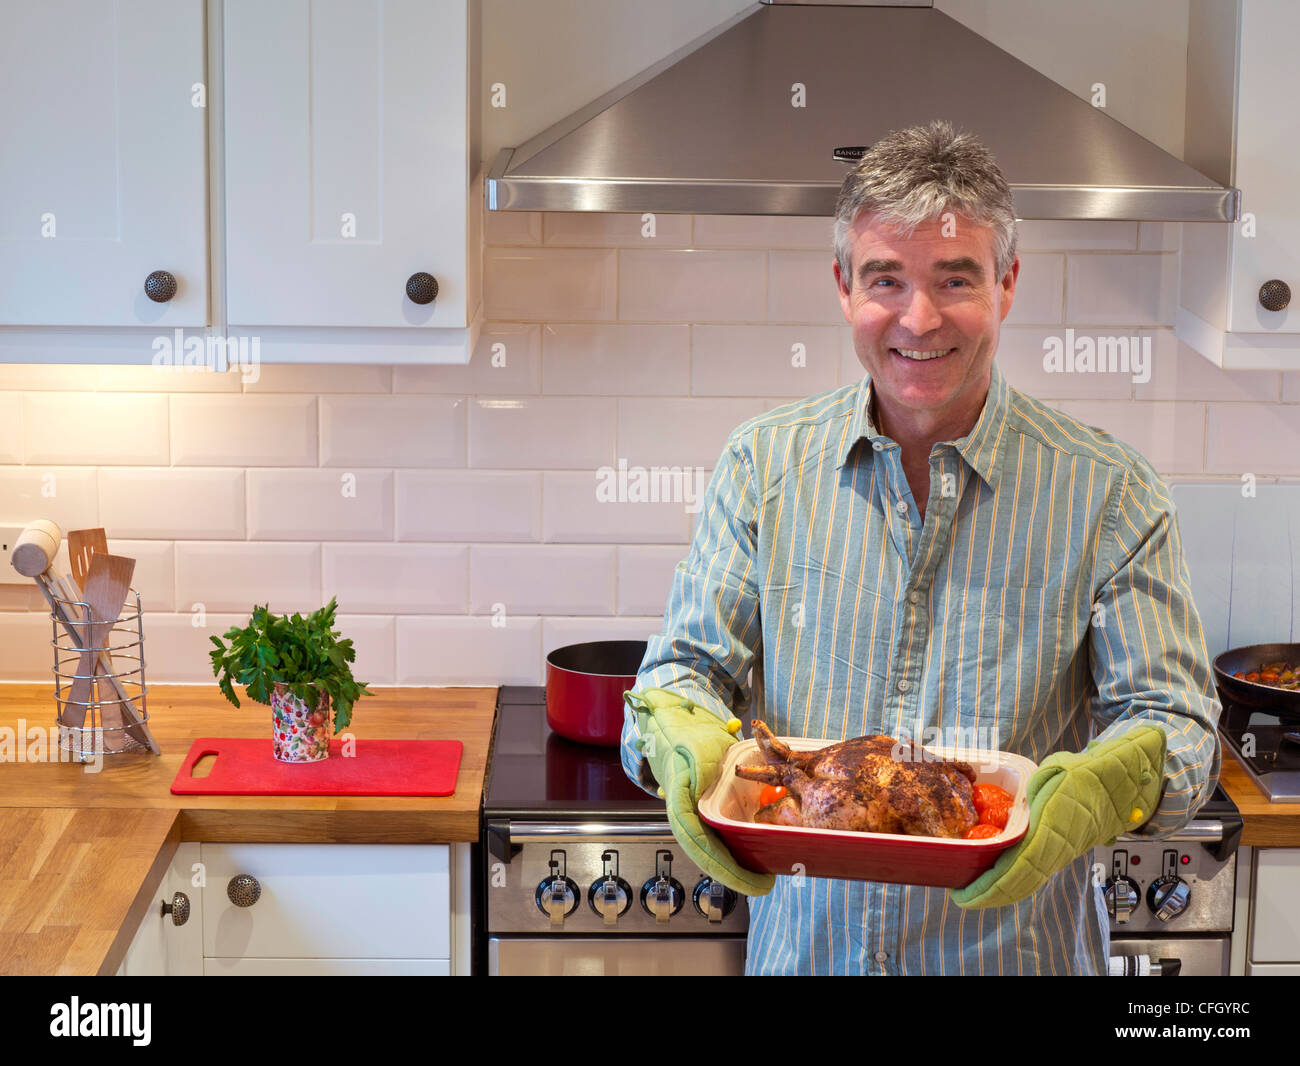 MAN COOKING CHICKEN Smiling relaxed confident mature man in contemporary kitchen presents a hot freshly cooked meal of roast chicken and vegetables Stock Photo